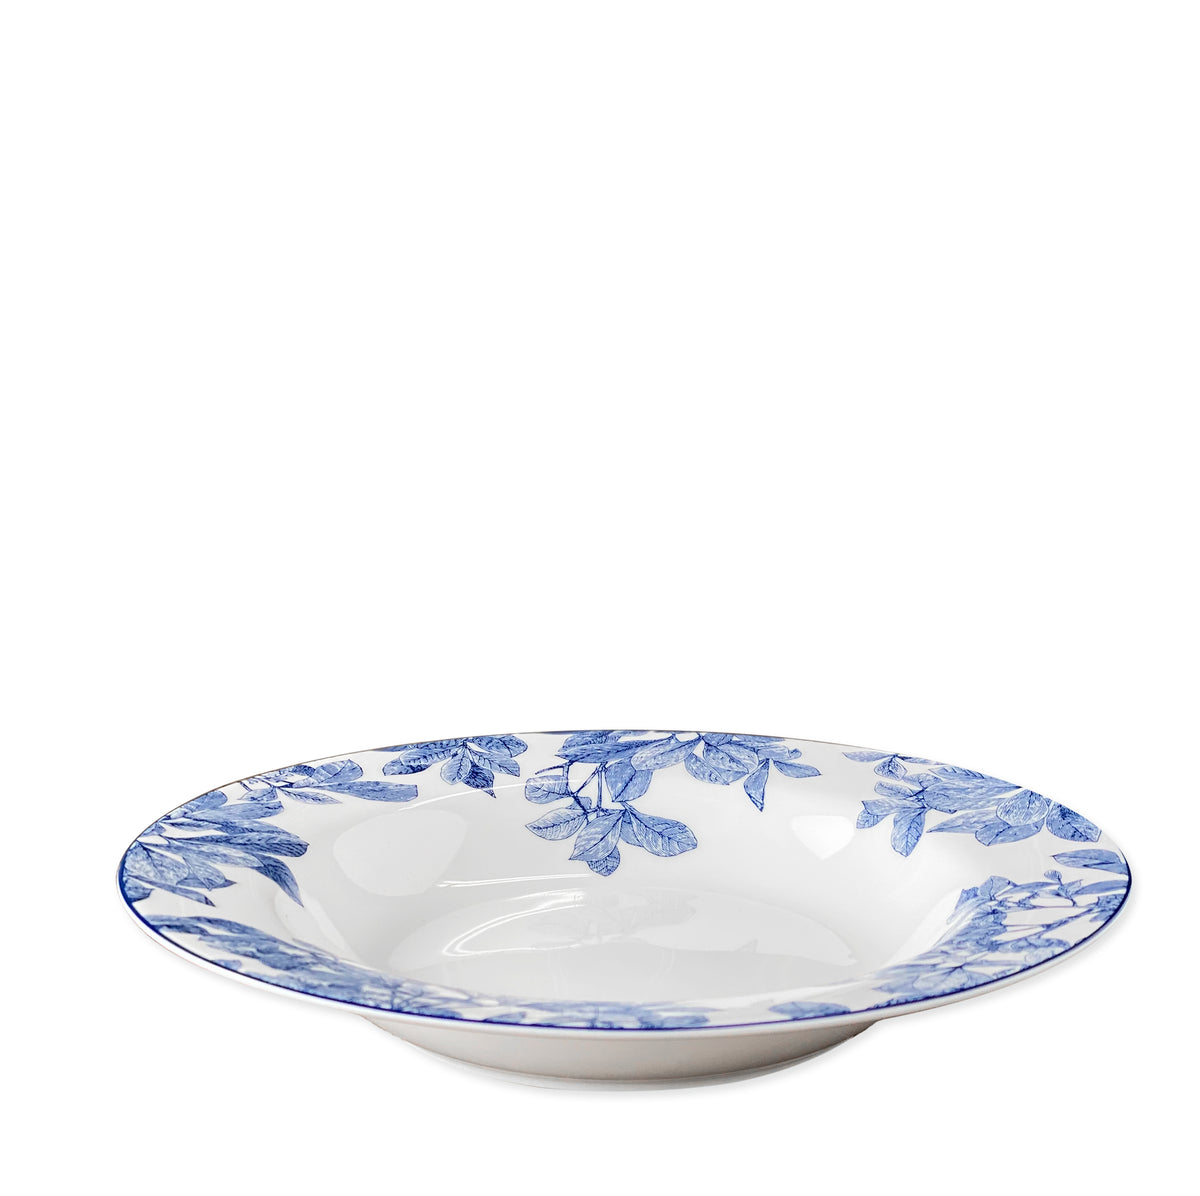 The Arbor Rimmed Soup Bowl, crafted by Caskata Artisanal Home from high-fire porcelain, features a white ceramic body with a blue floral pattern around the rim. This elegant piece is also dishwasher safe for easy cleaning.